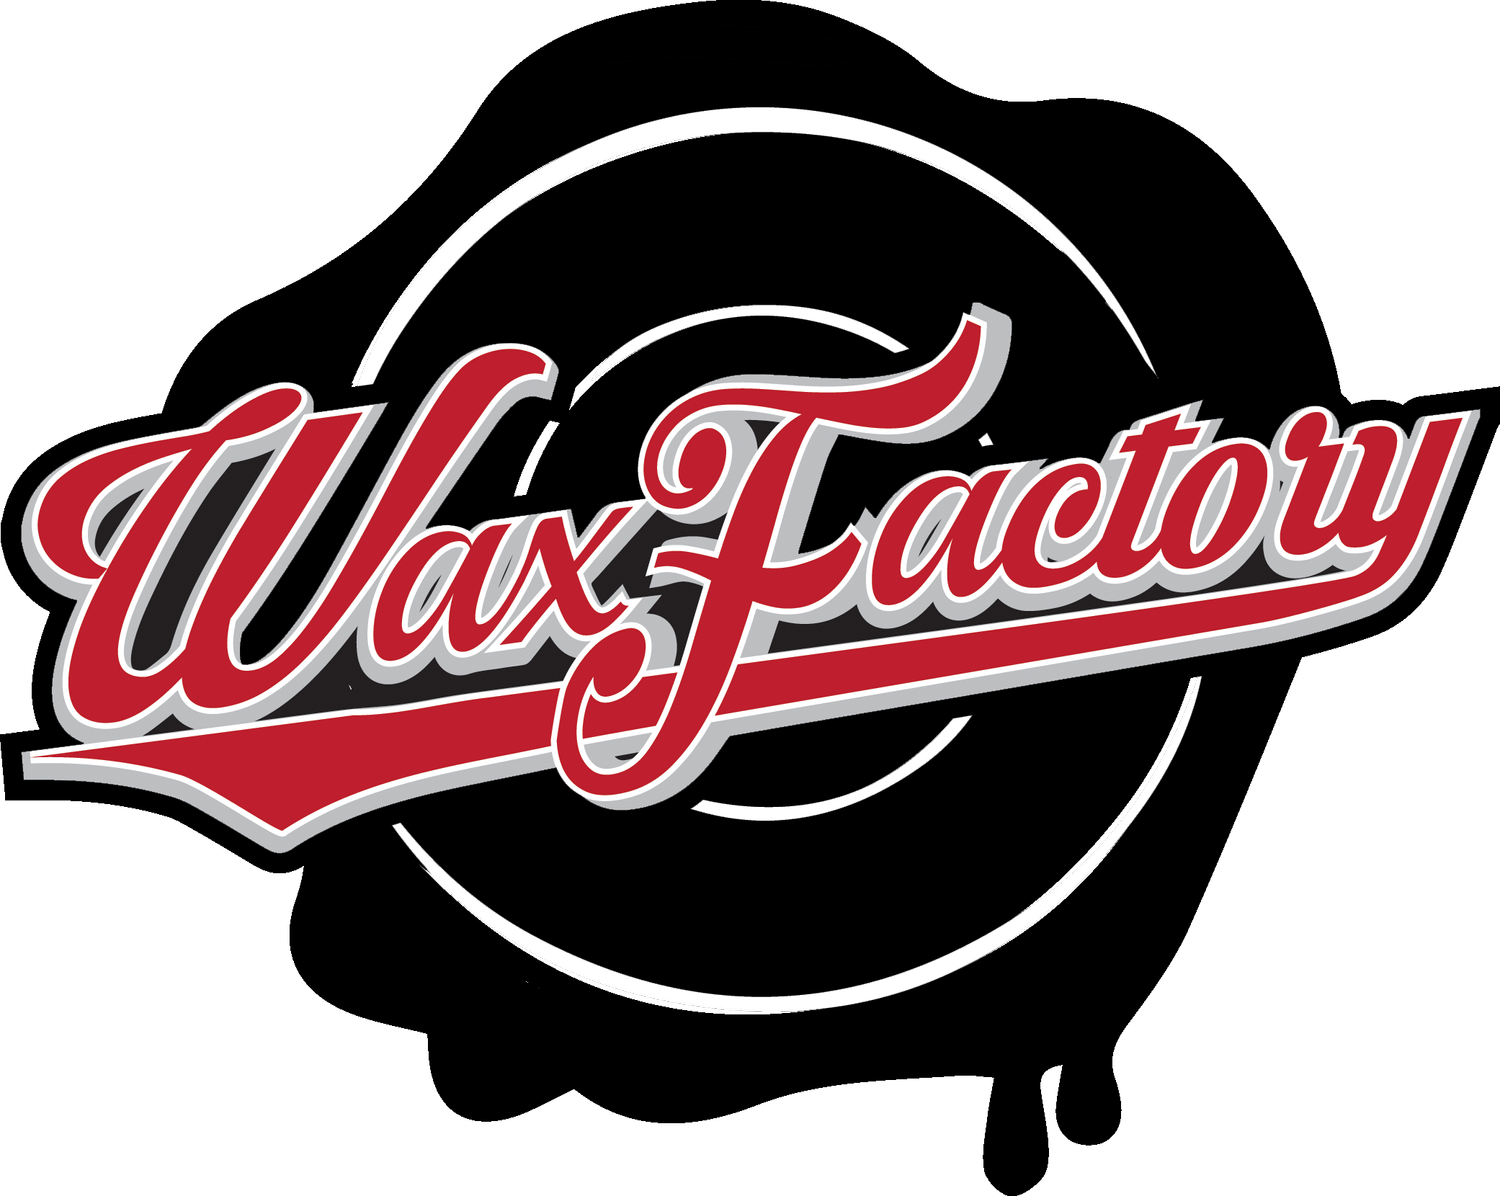 Louisville wedding band, Wax Factory. The Ultimate Party and Dance Band in Louisville KY